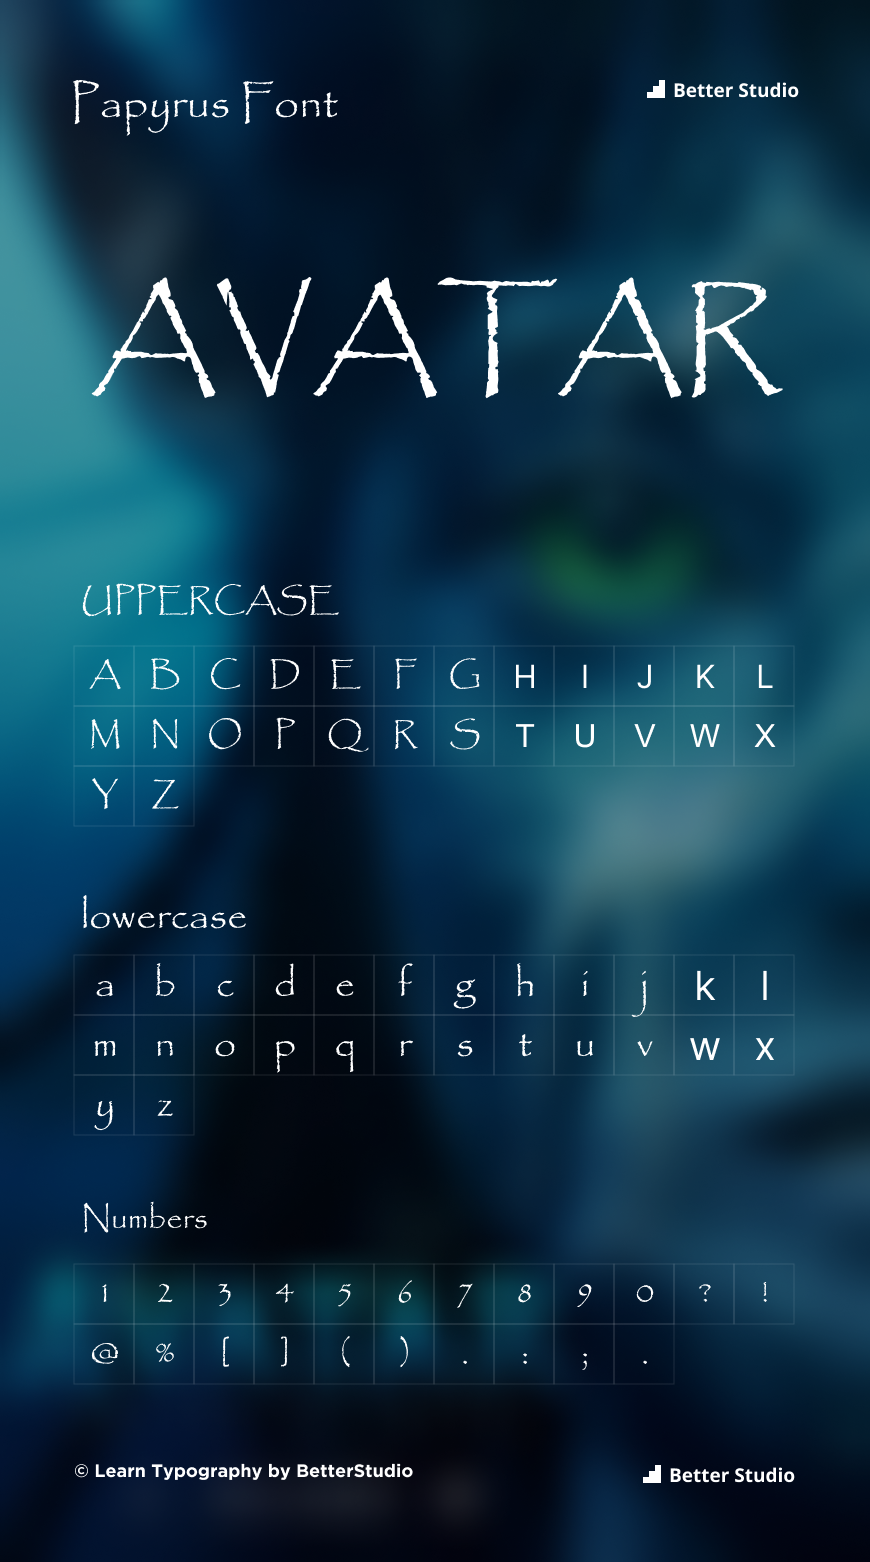 Avatar Font: Download Free Font Now